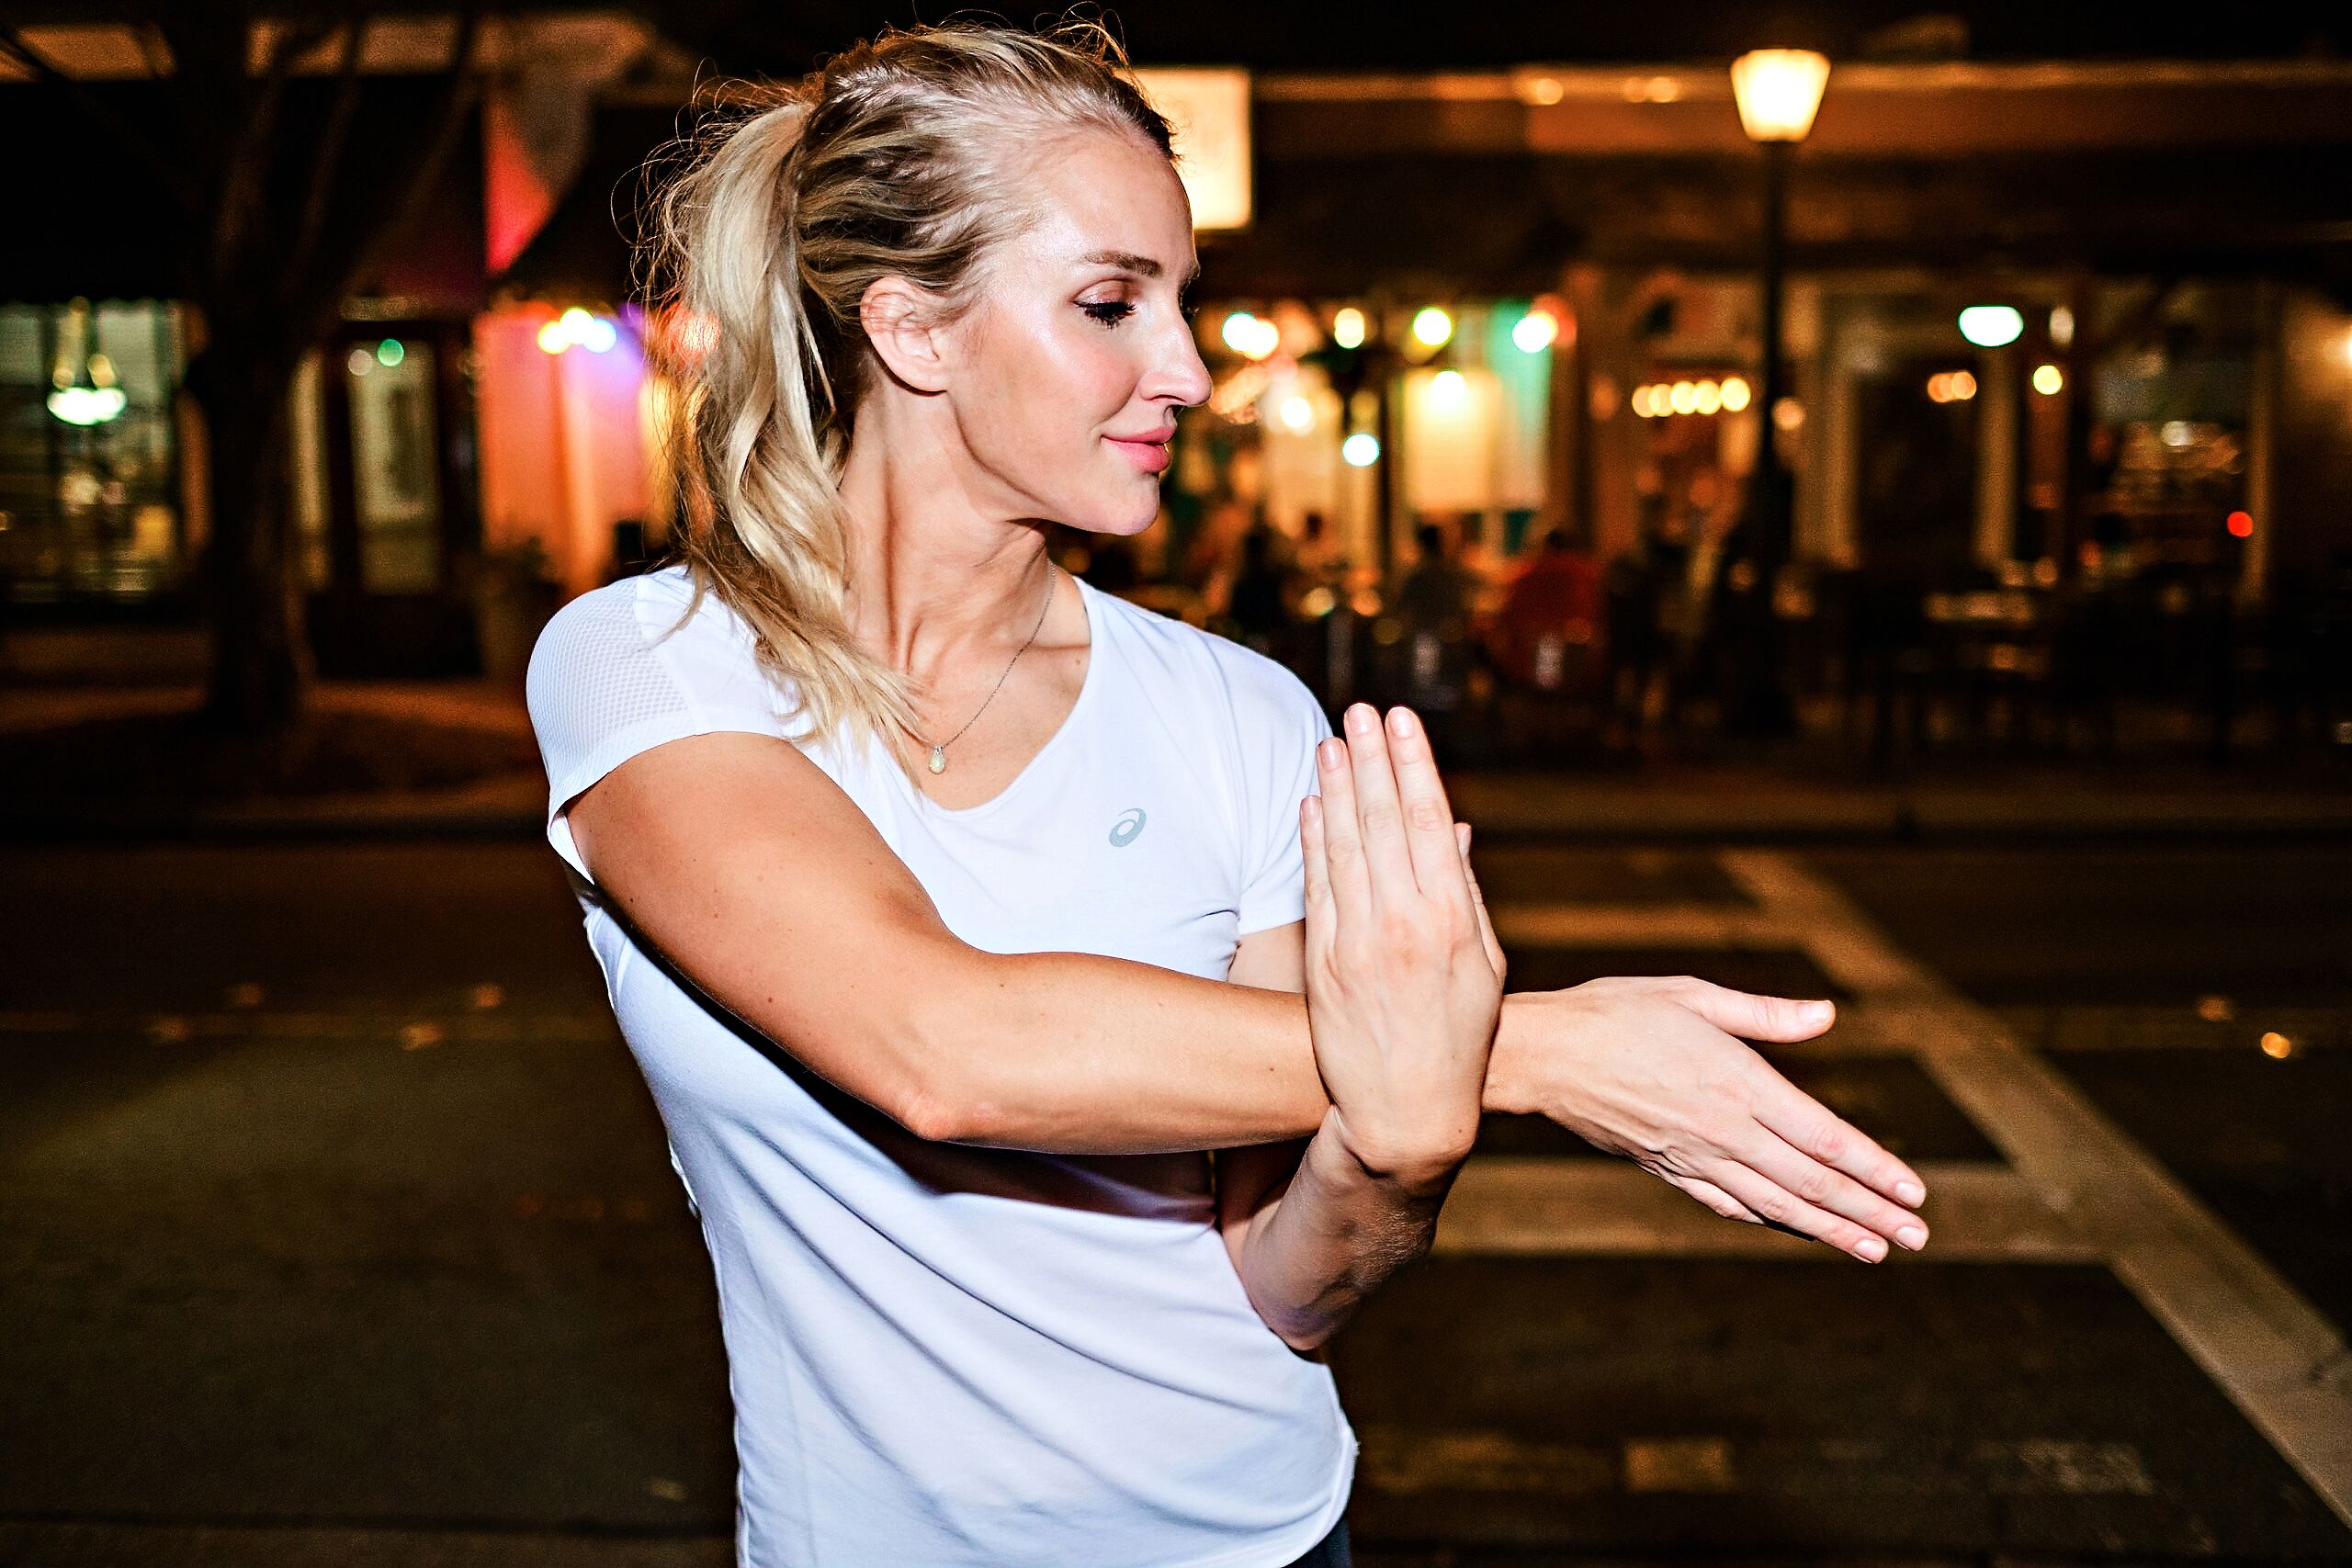 Curious what running and meditating have in common? Popular Atlanta Blogger Happily Hughes is sharing her latest find you have to see HERE!